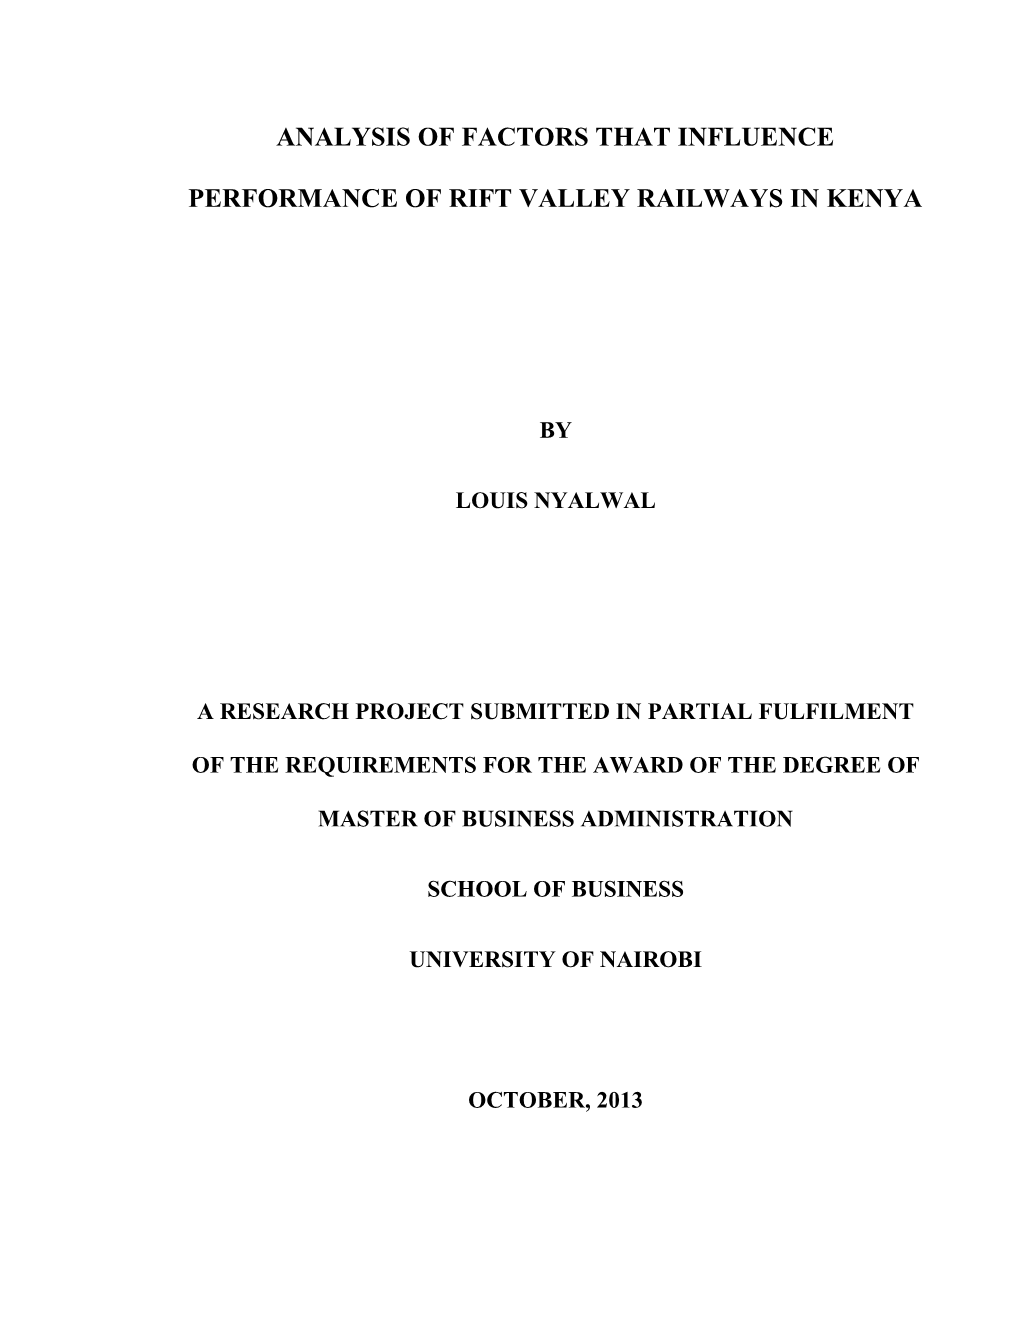 Analysis of Factors That Influence Performance of Rift Valley Railways In